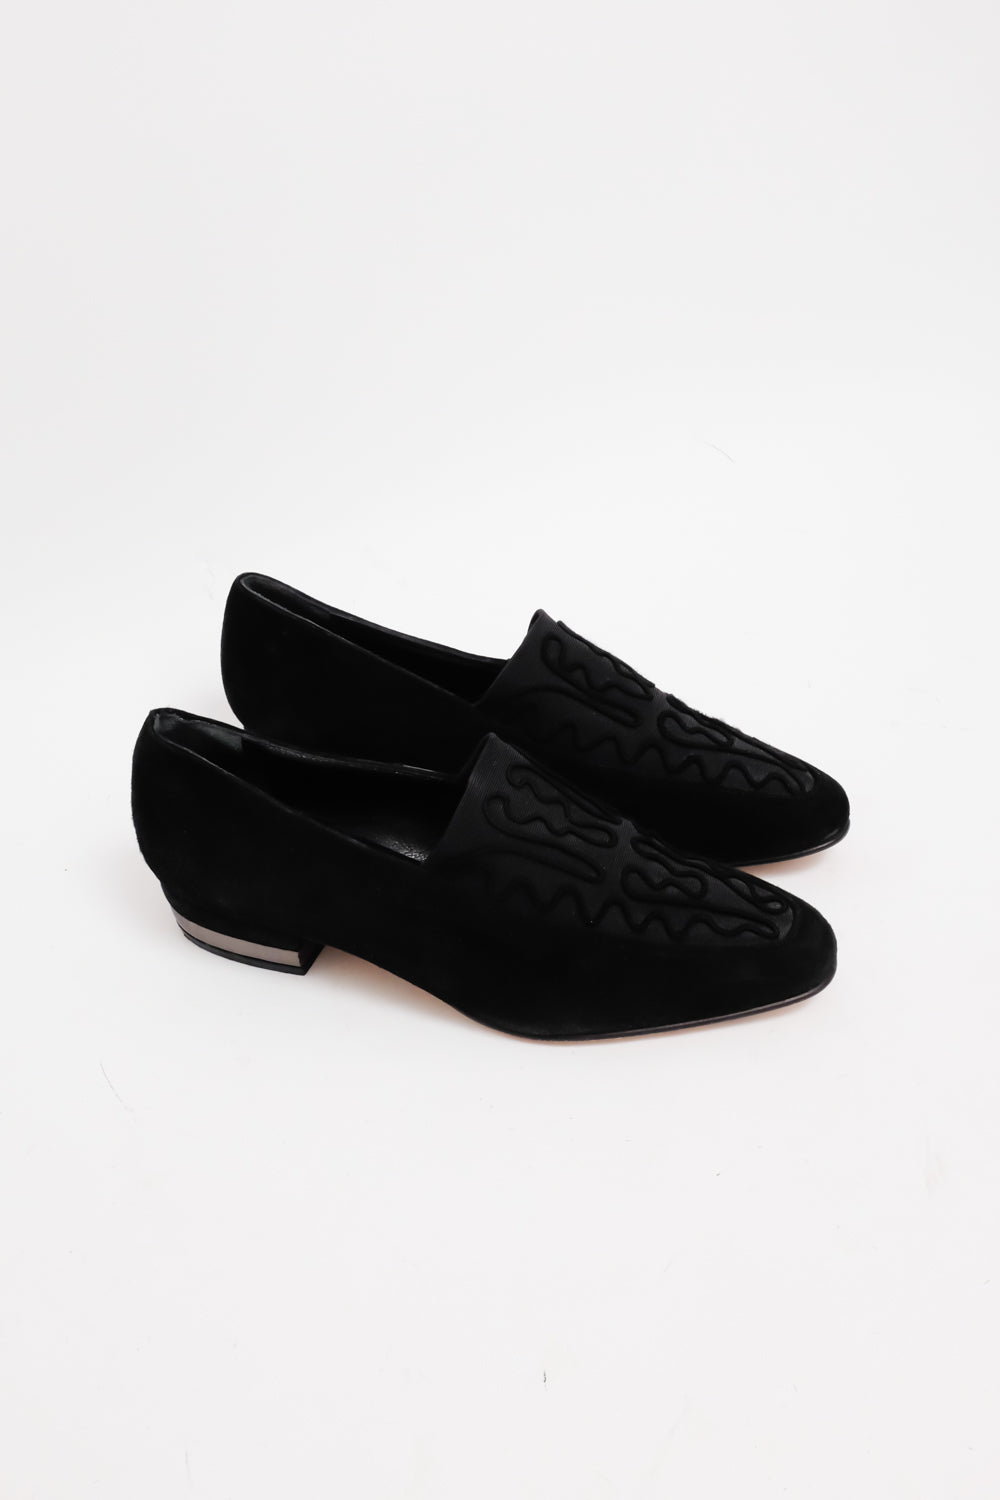 MARCO BURRESI ITALY BLACK LEATHER LOAFER 36,5